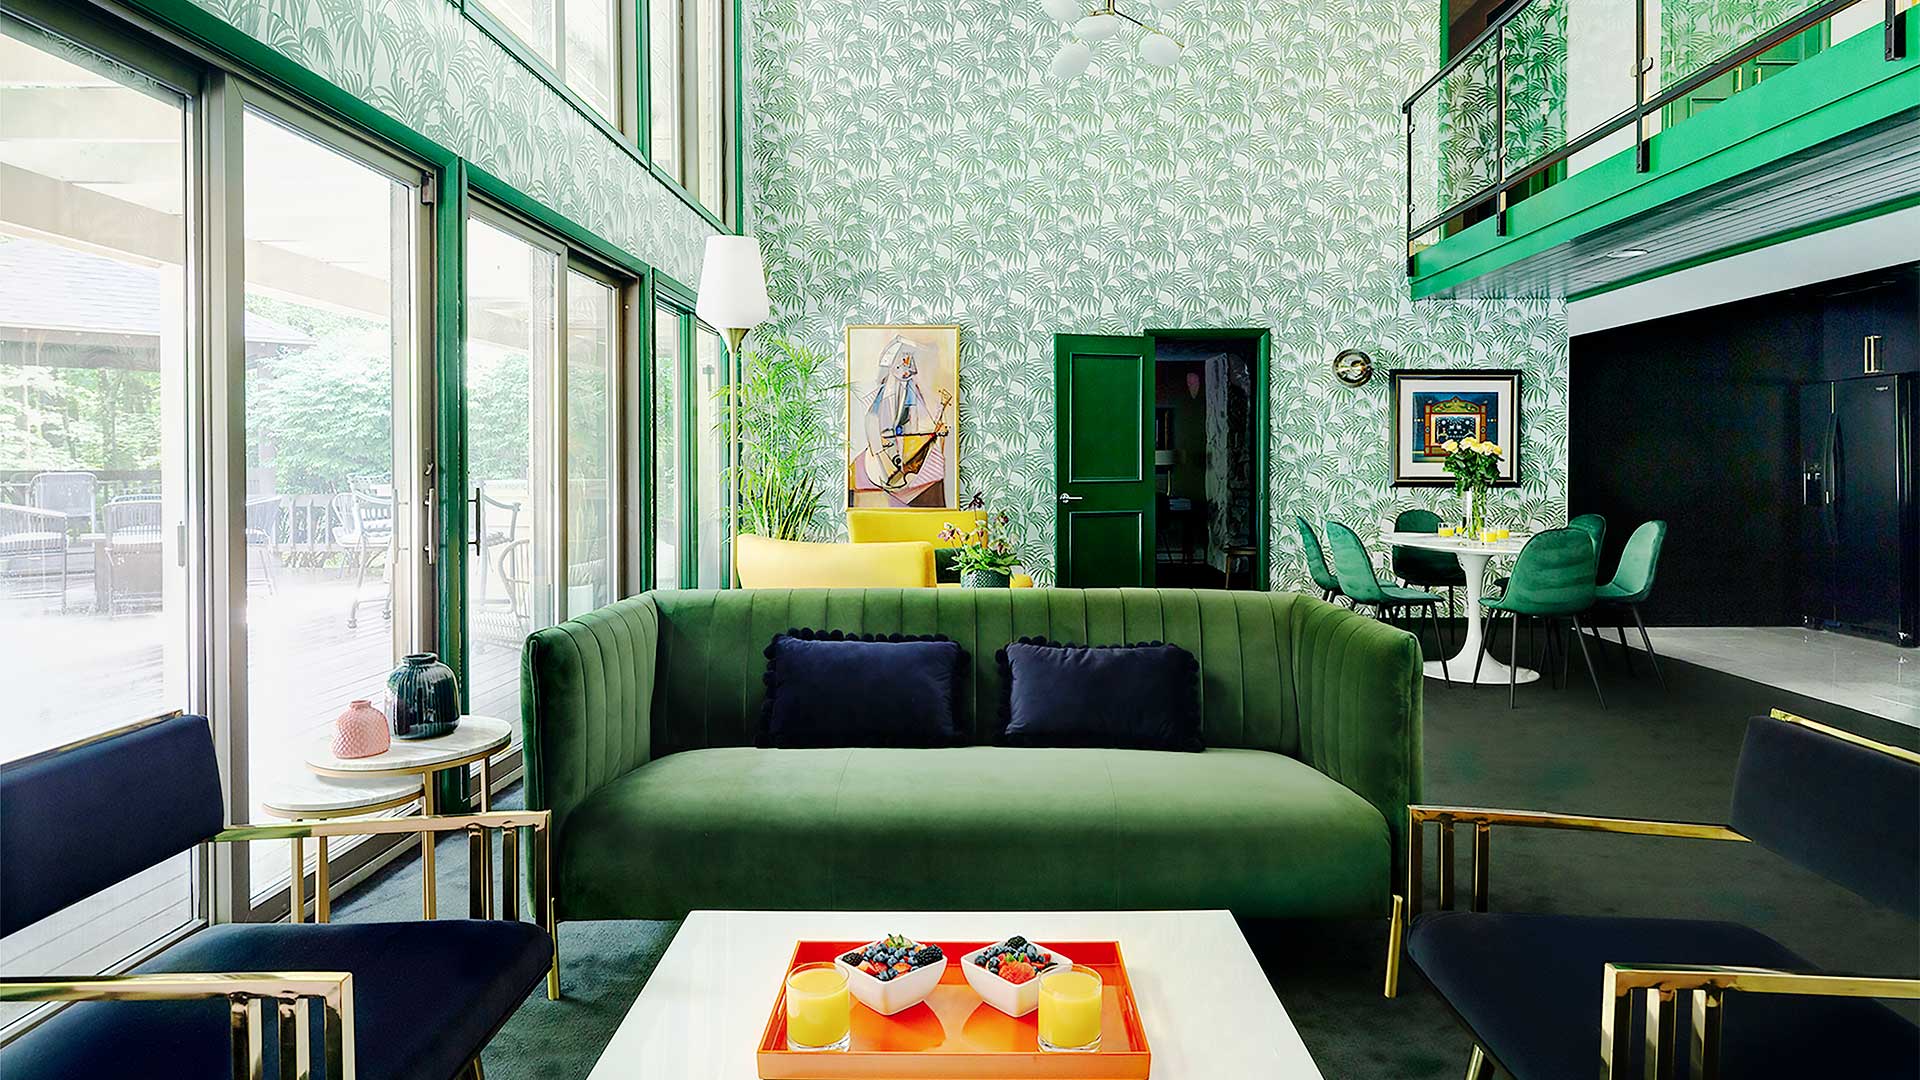 an interior shot of grouse glen's living area. The space has a stunning emerald green theme. The couch is velvet and there is patterned wallpaper in the background. Art dots the room bringing in accents of orange, red and yellow